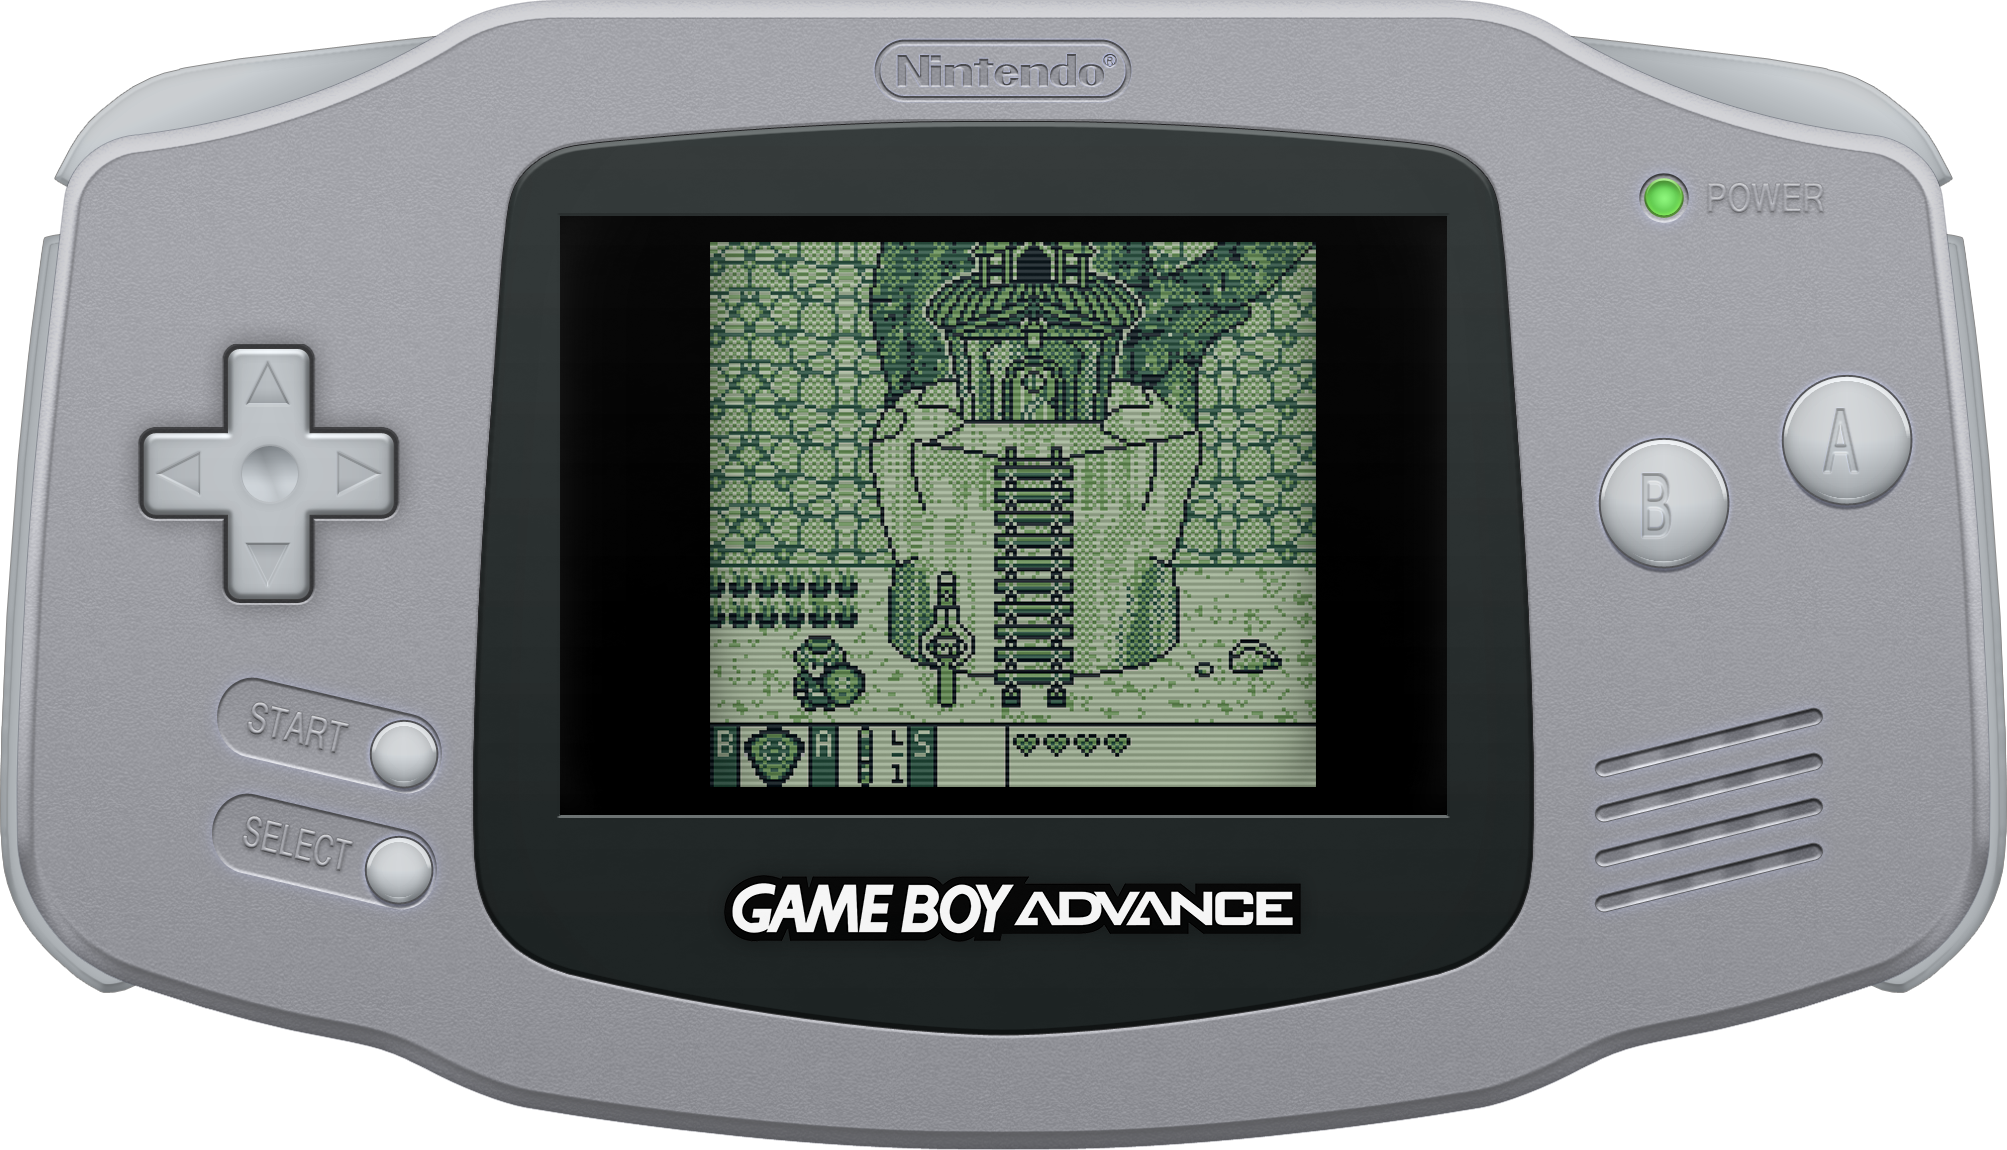 Gameboy Advance Rom Icons by Alforata on DeviantArt